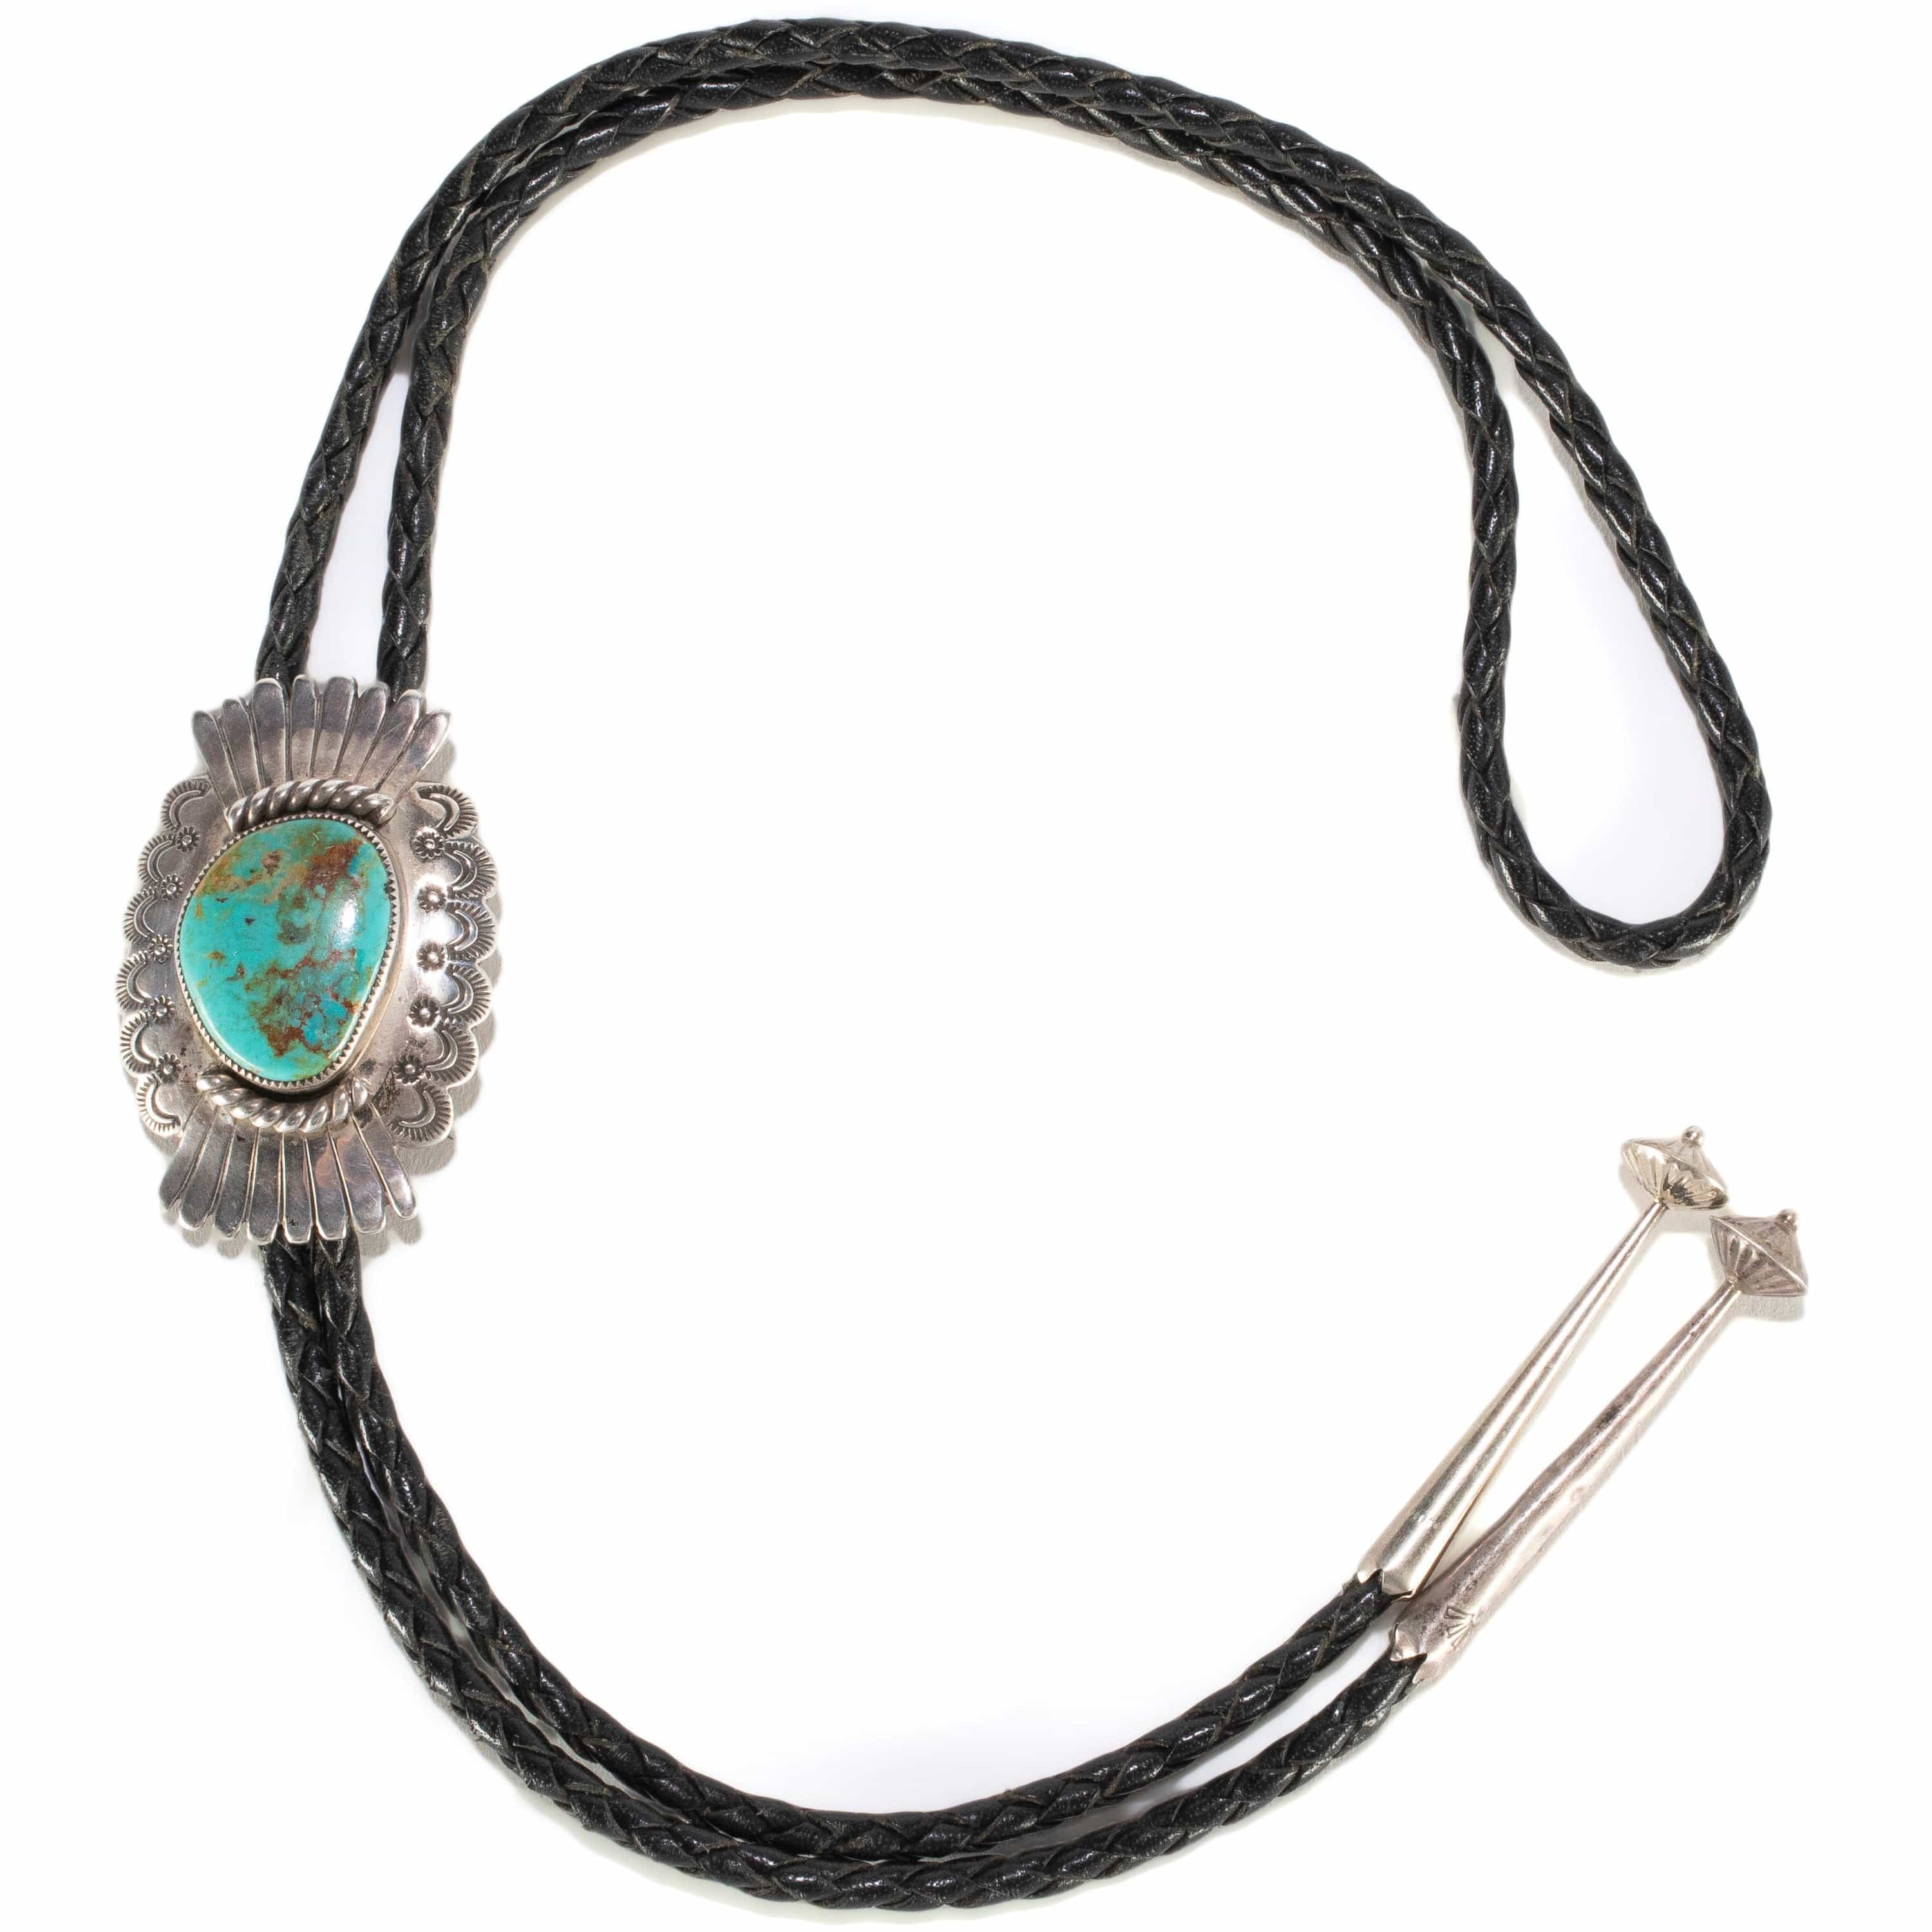 Kalifano Native American Jewelry Kingman Turquoise USA Native American Made 925 Sterling Silver Bolo Tie NABT1000.001